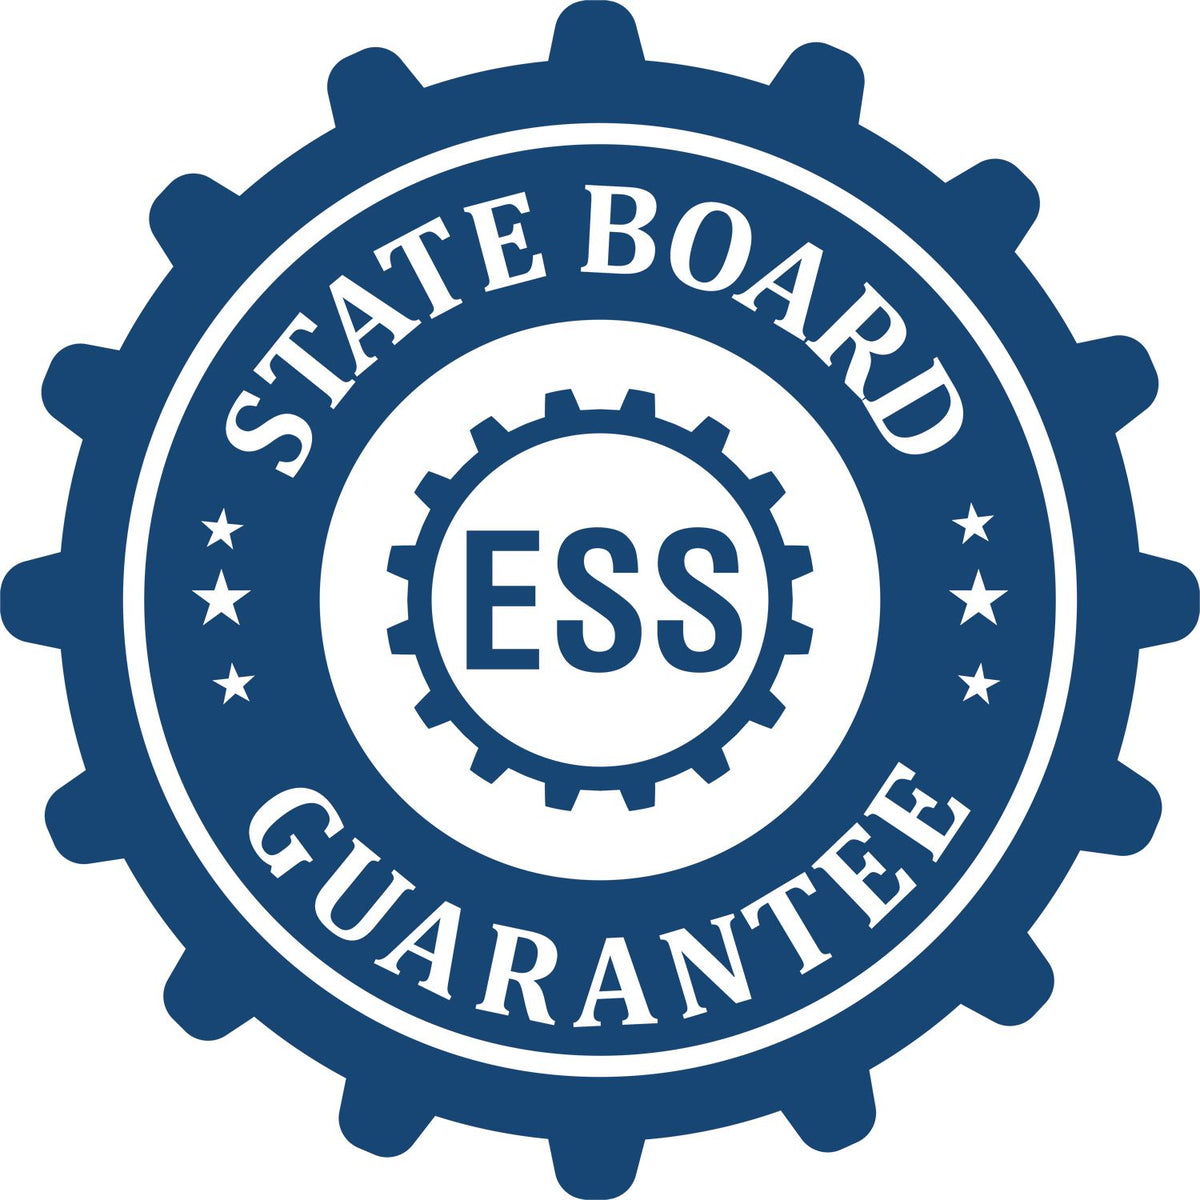 An emblem in a gear shape illustrating a state board guarantee for the Illinois Desk Architect Embossing Seal product.